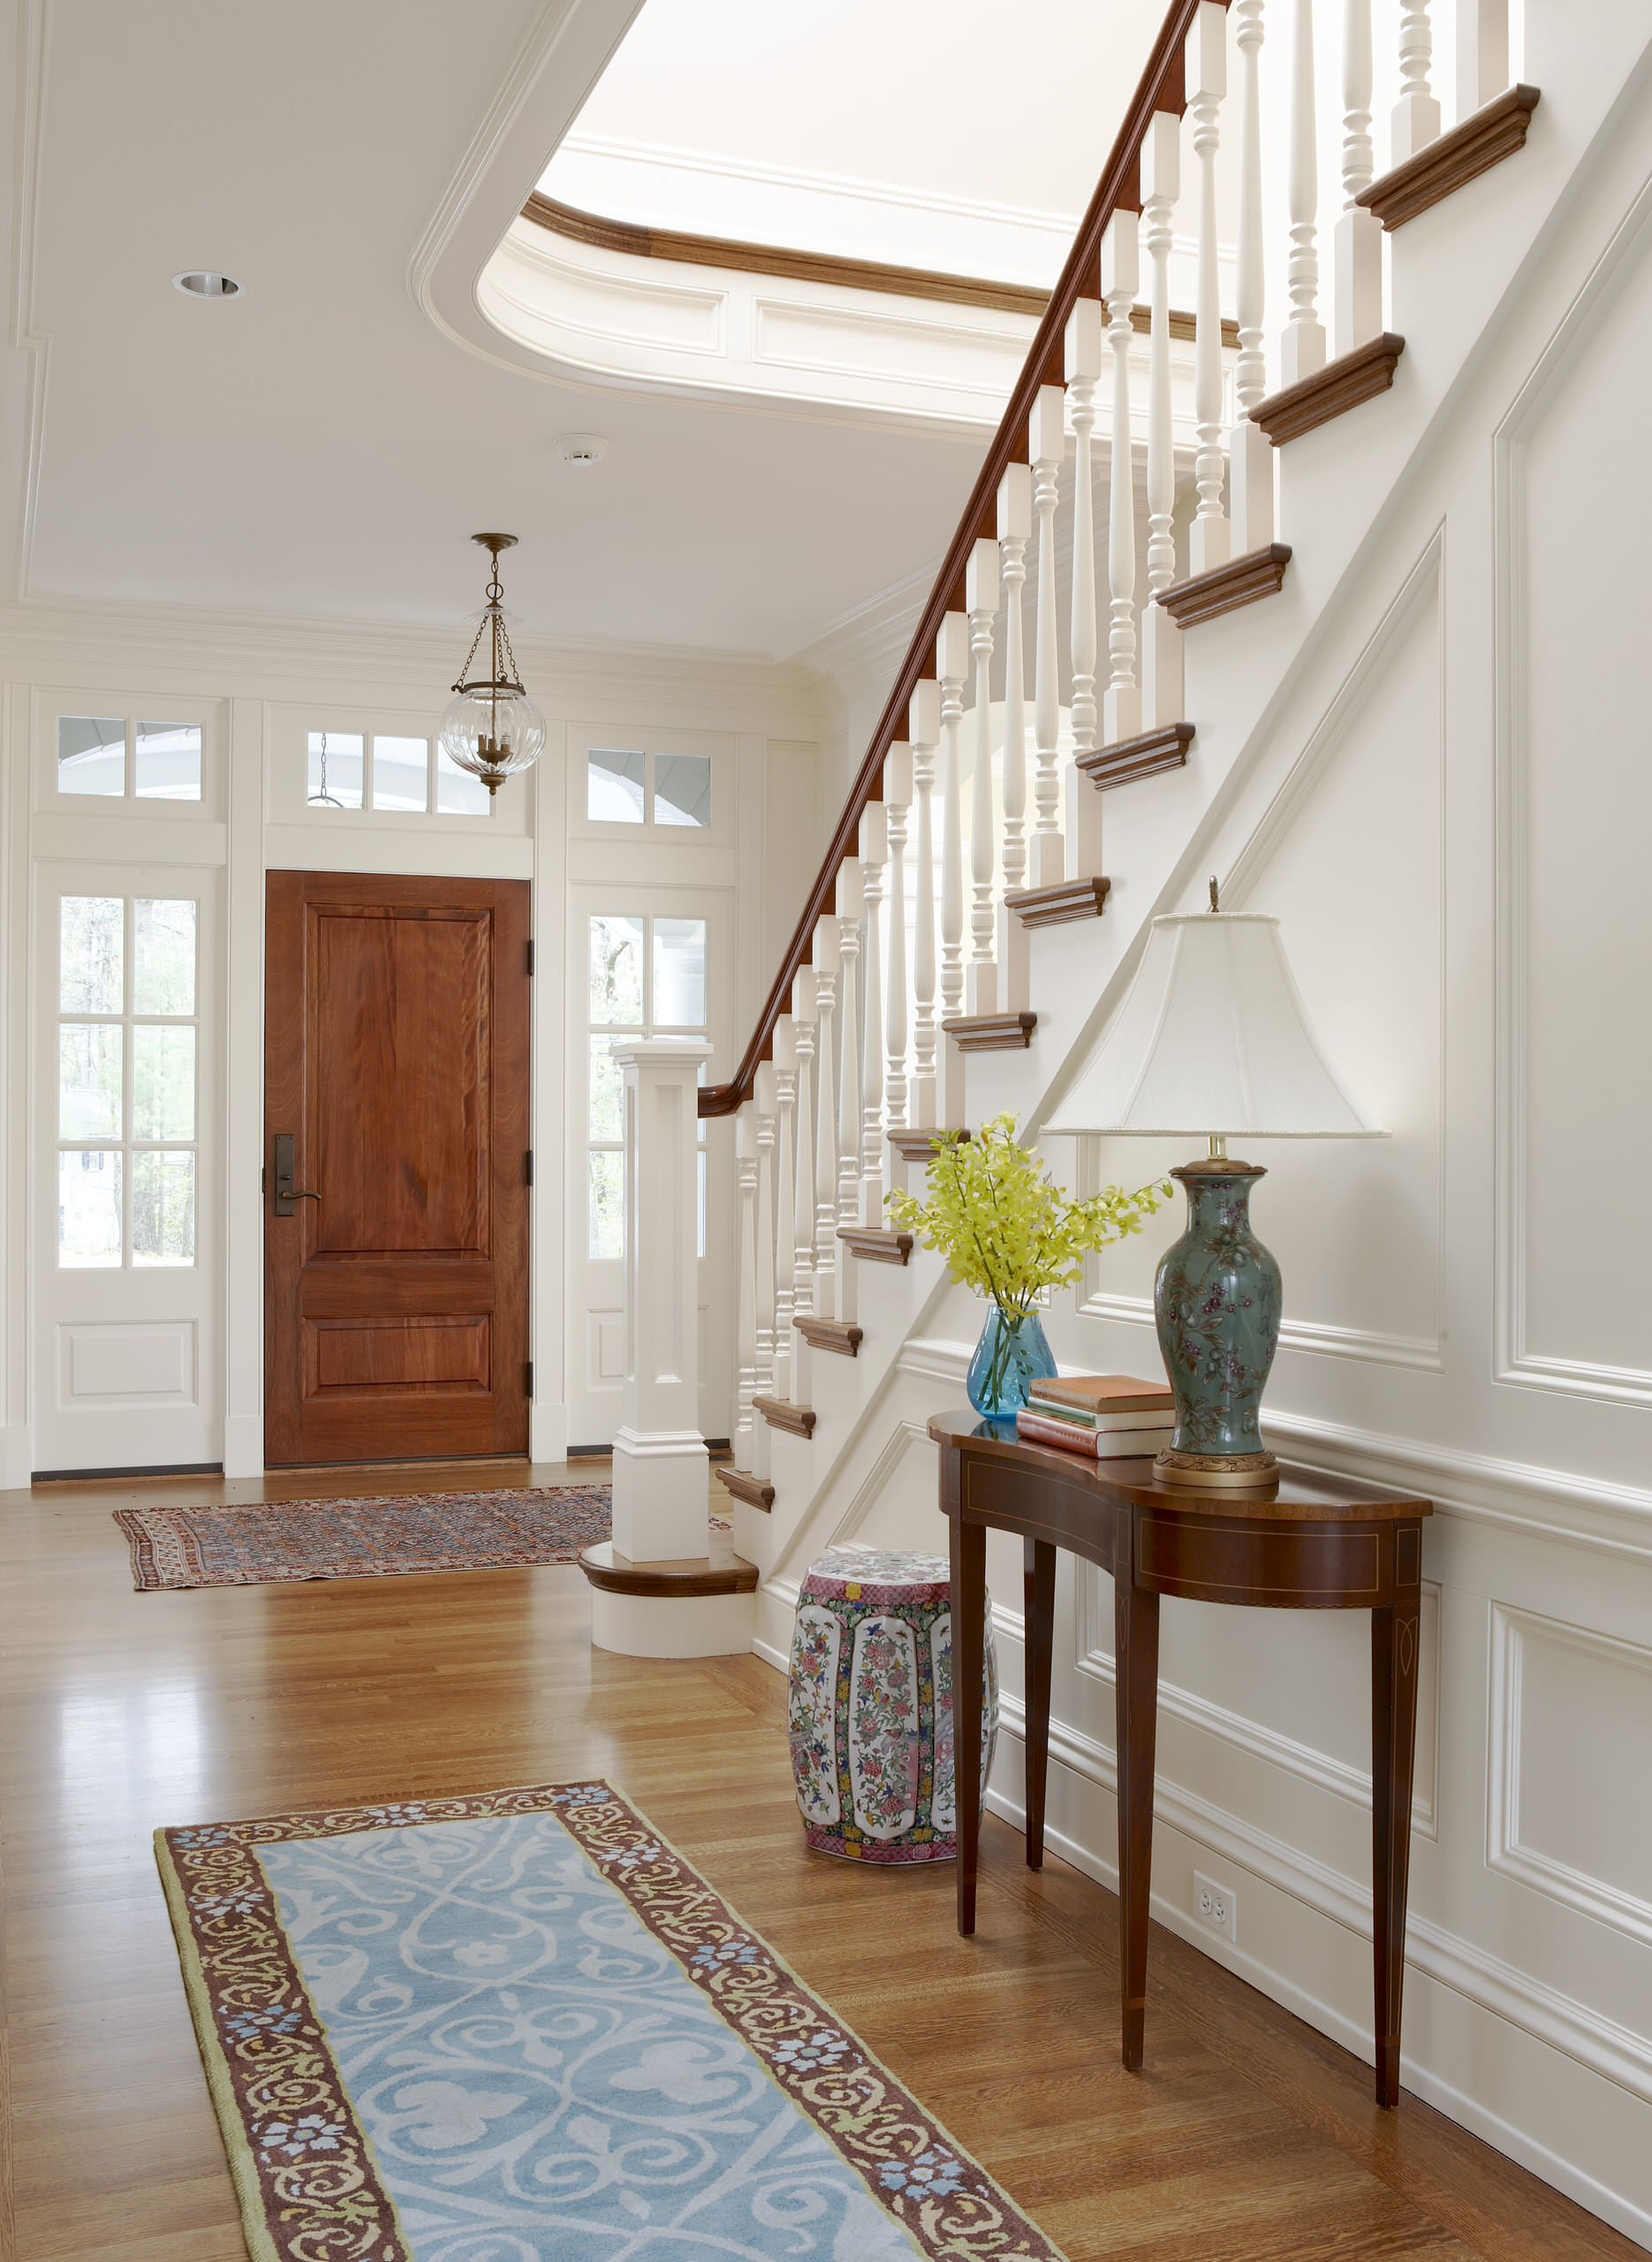 75 Traditional Foyer Ideas You'll Love - September, 2023 | Houzz